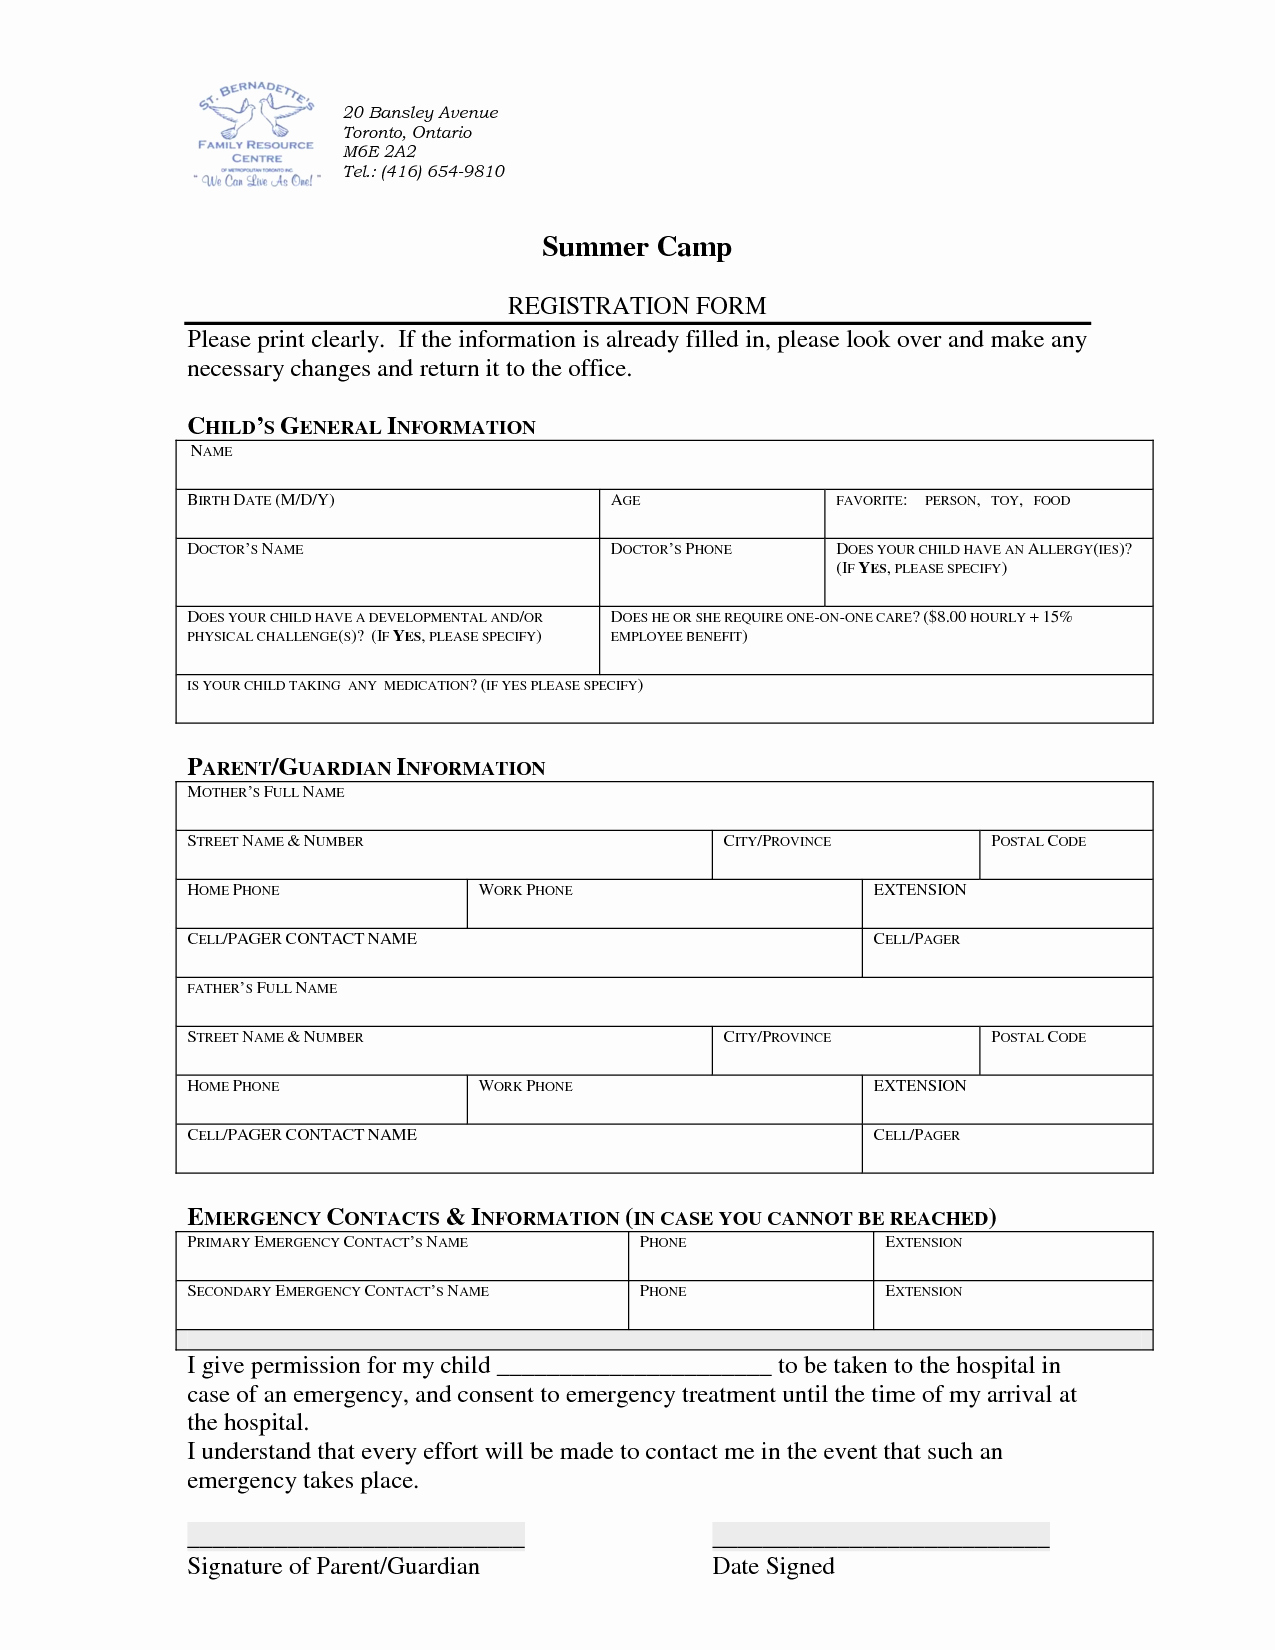 Free Registration form Template Awesome 5 Best Of Summer Camp Free Printable Templates